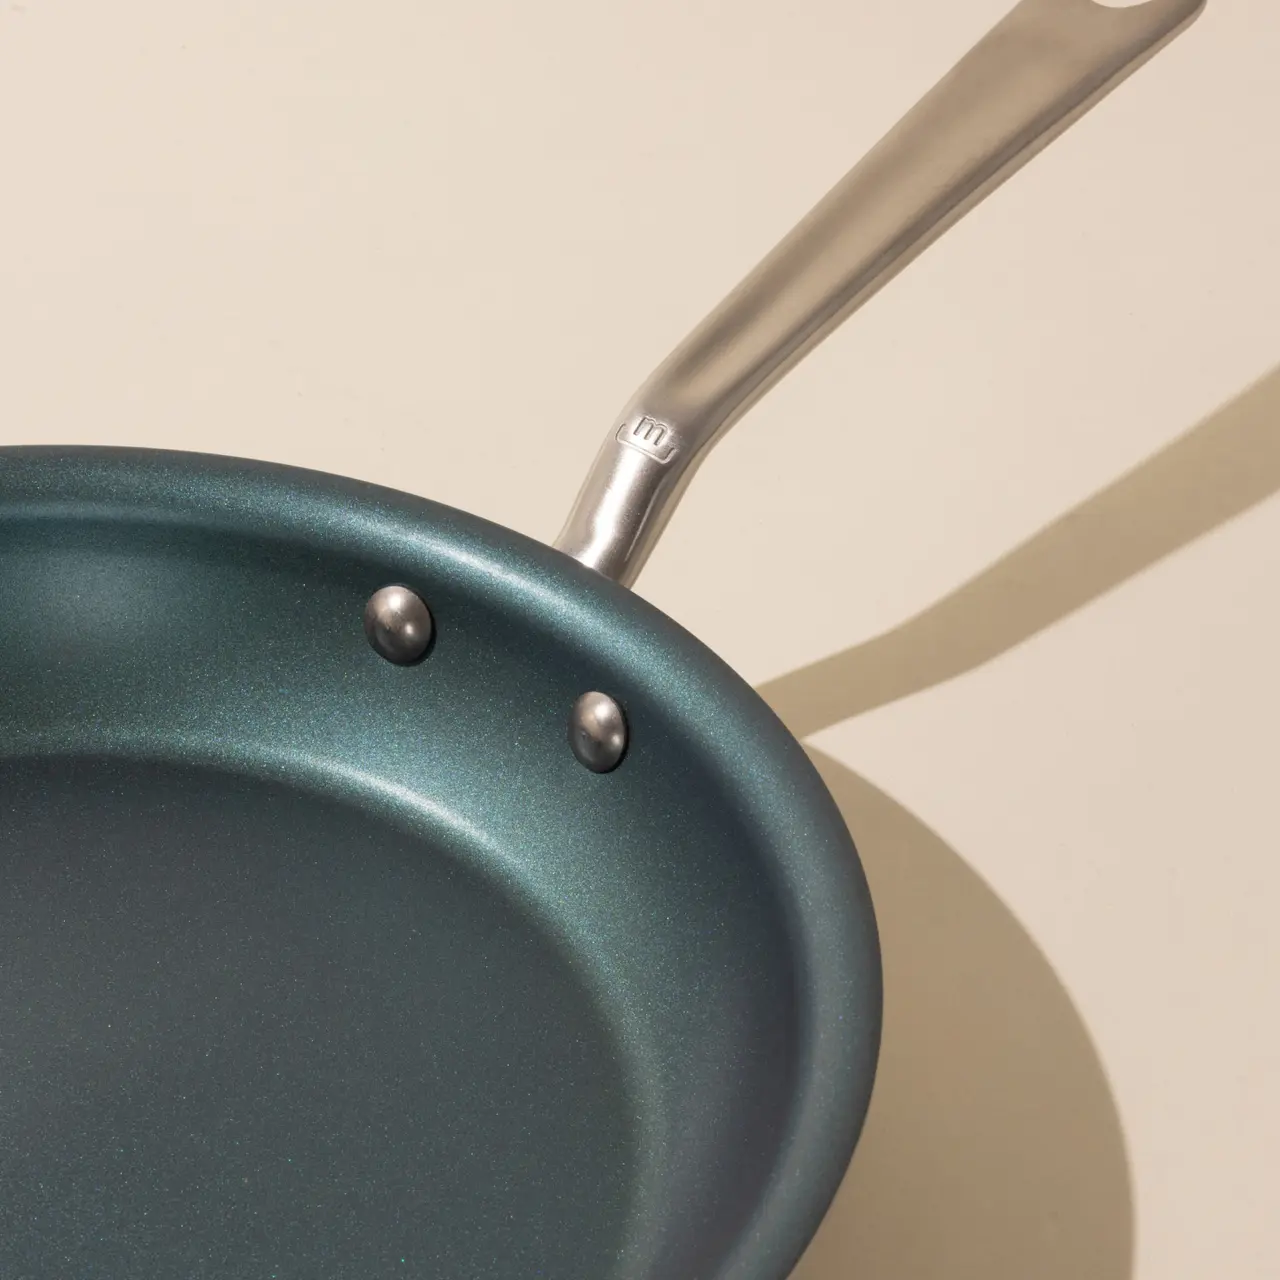 A non-stick frying pan with two metal rivets securing the handle, casting a shadow on a light background.